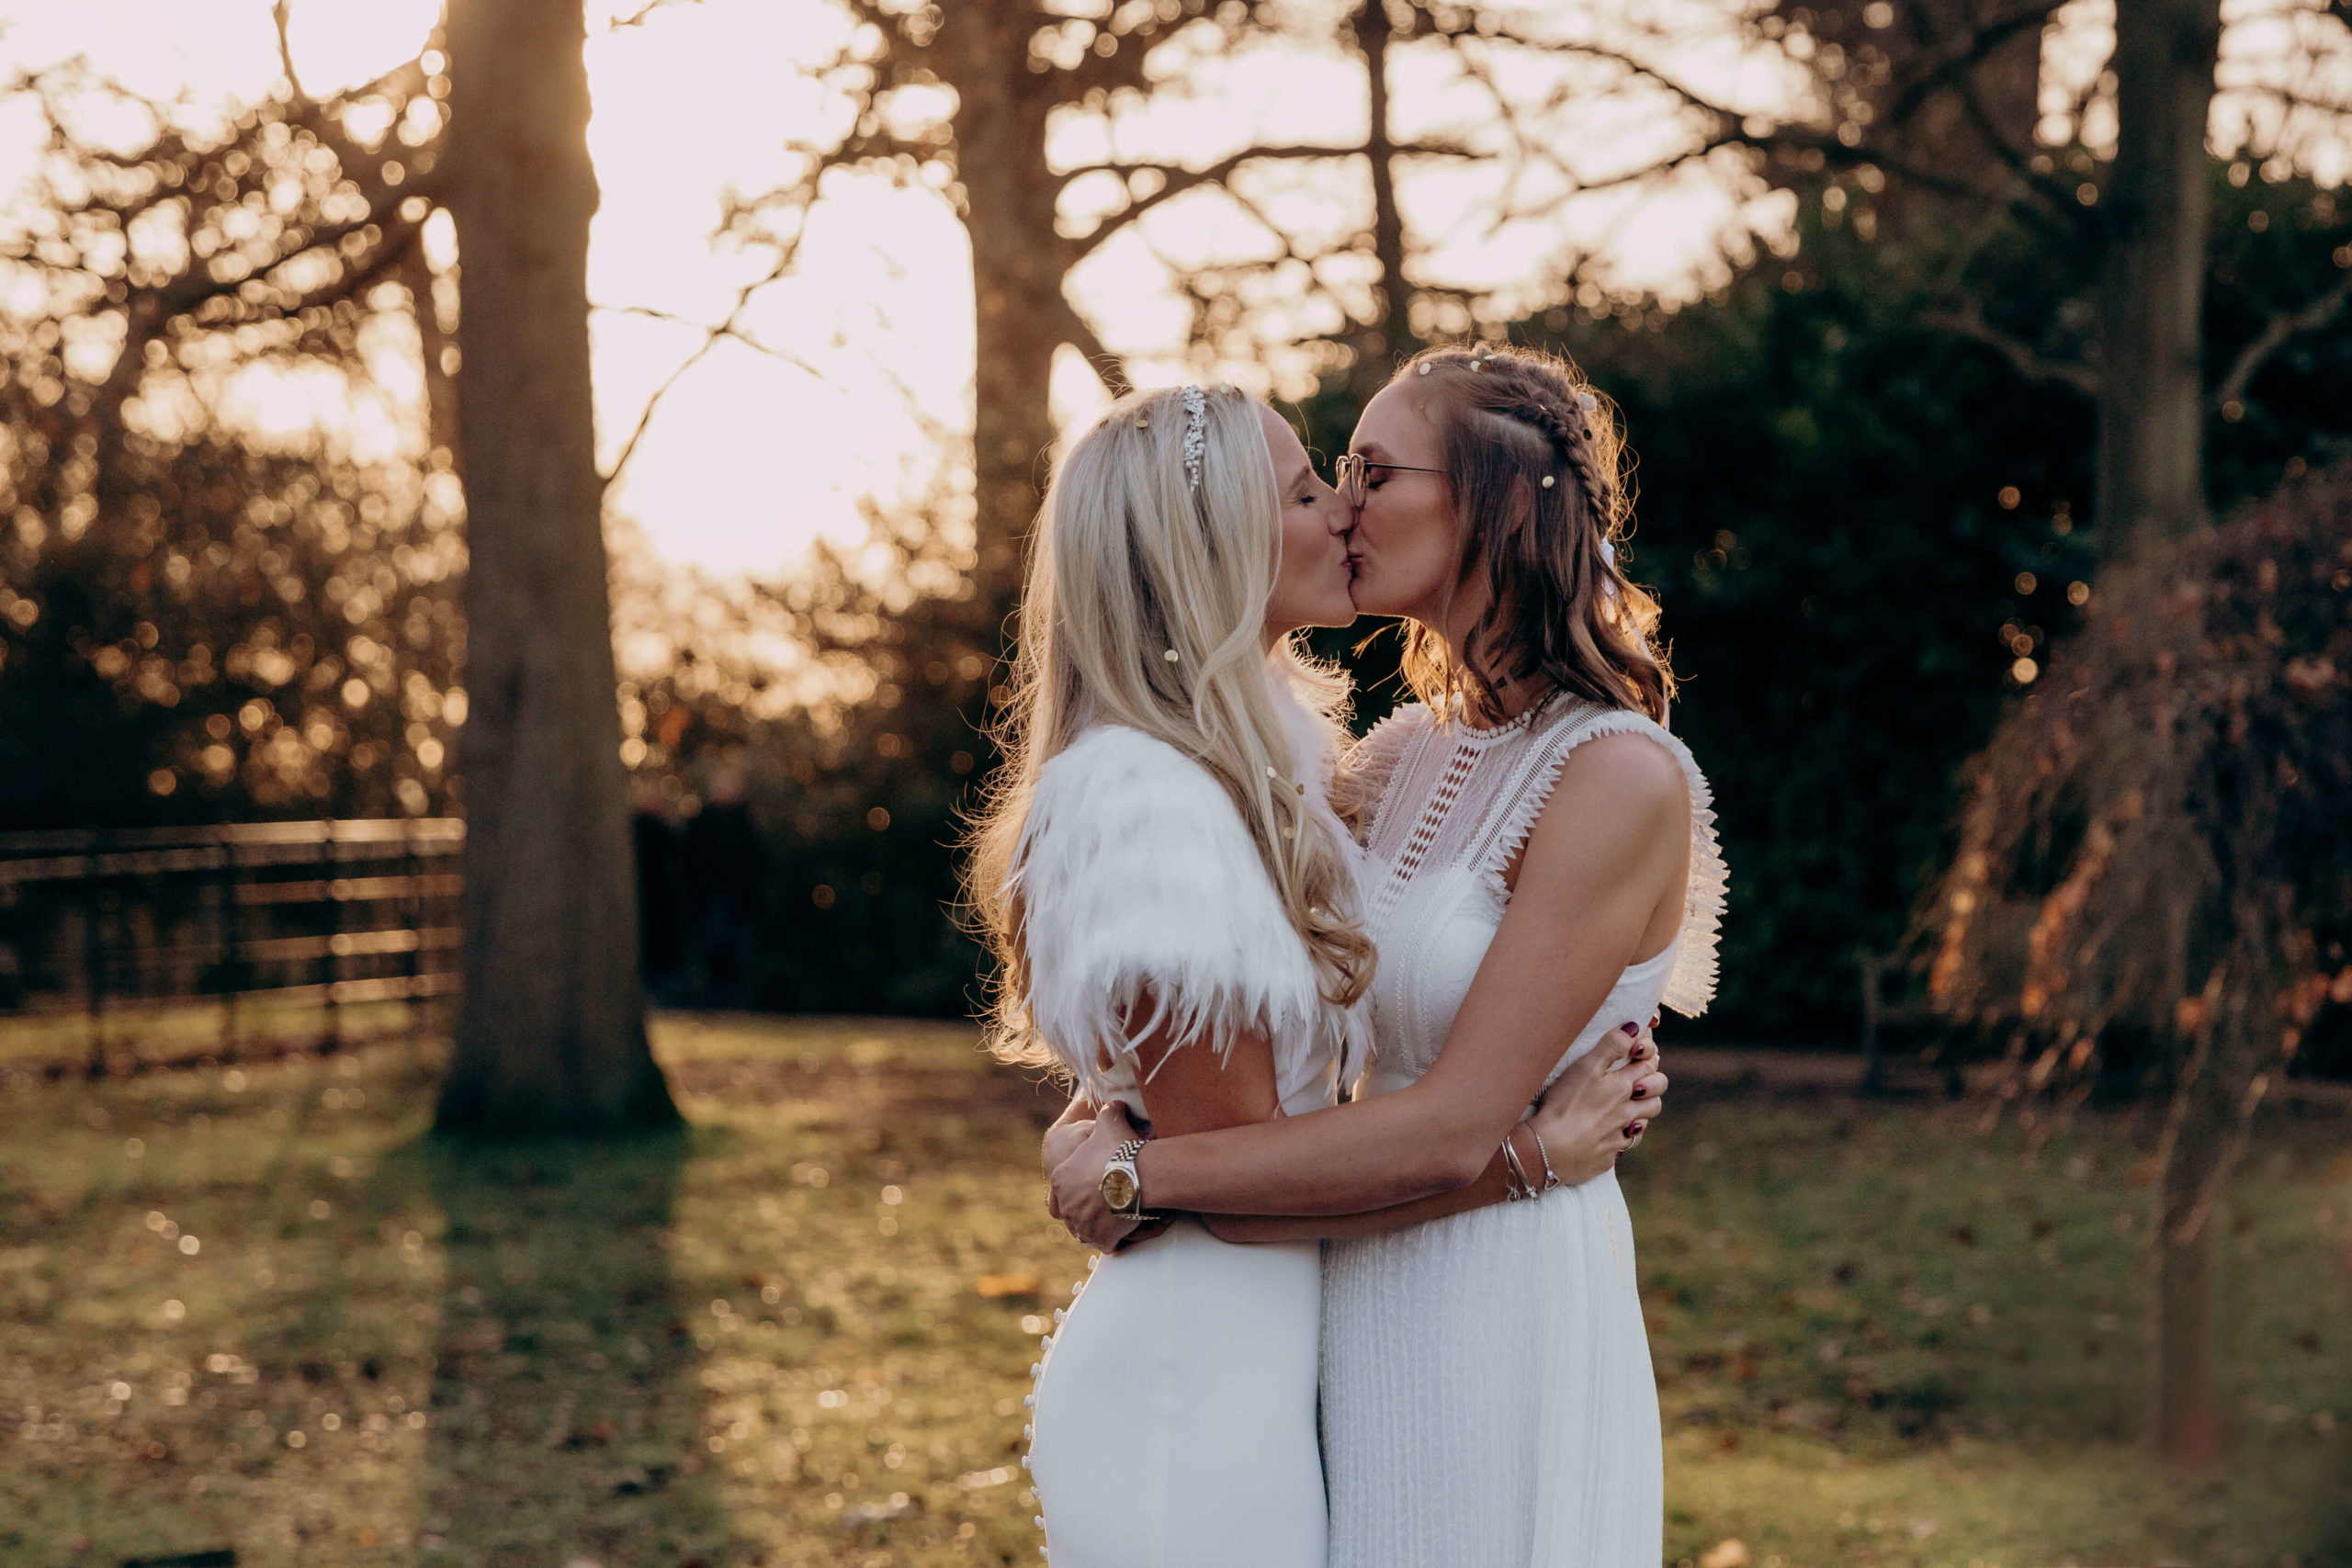 Claudia and Nicola kiss during sunset after their wedding ceremony in Richmond